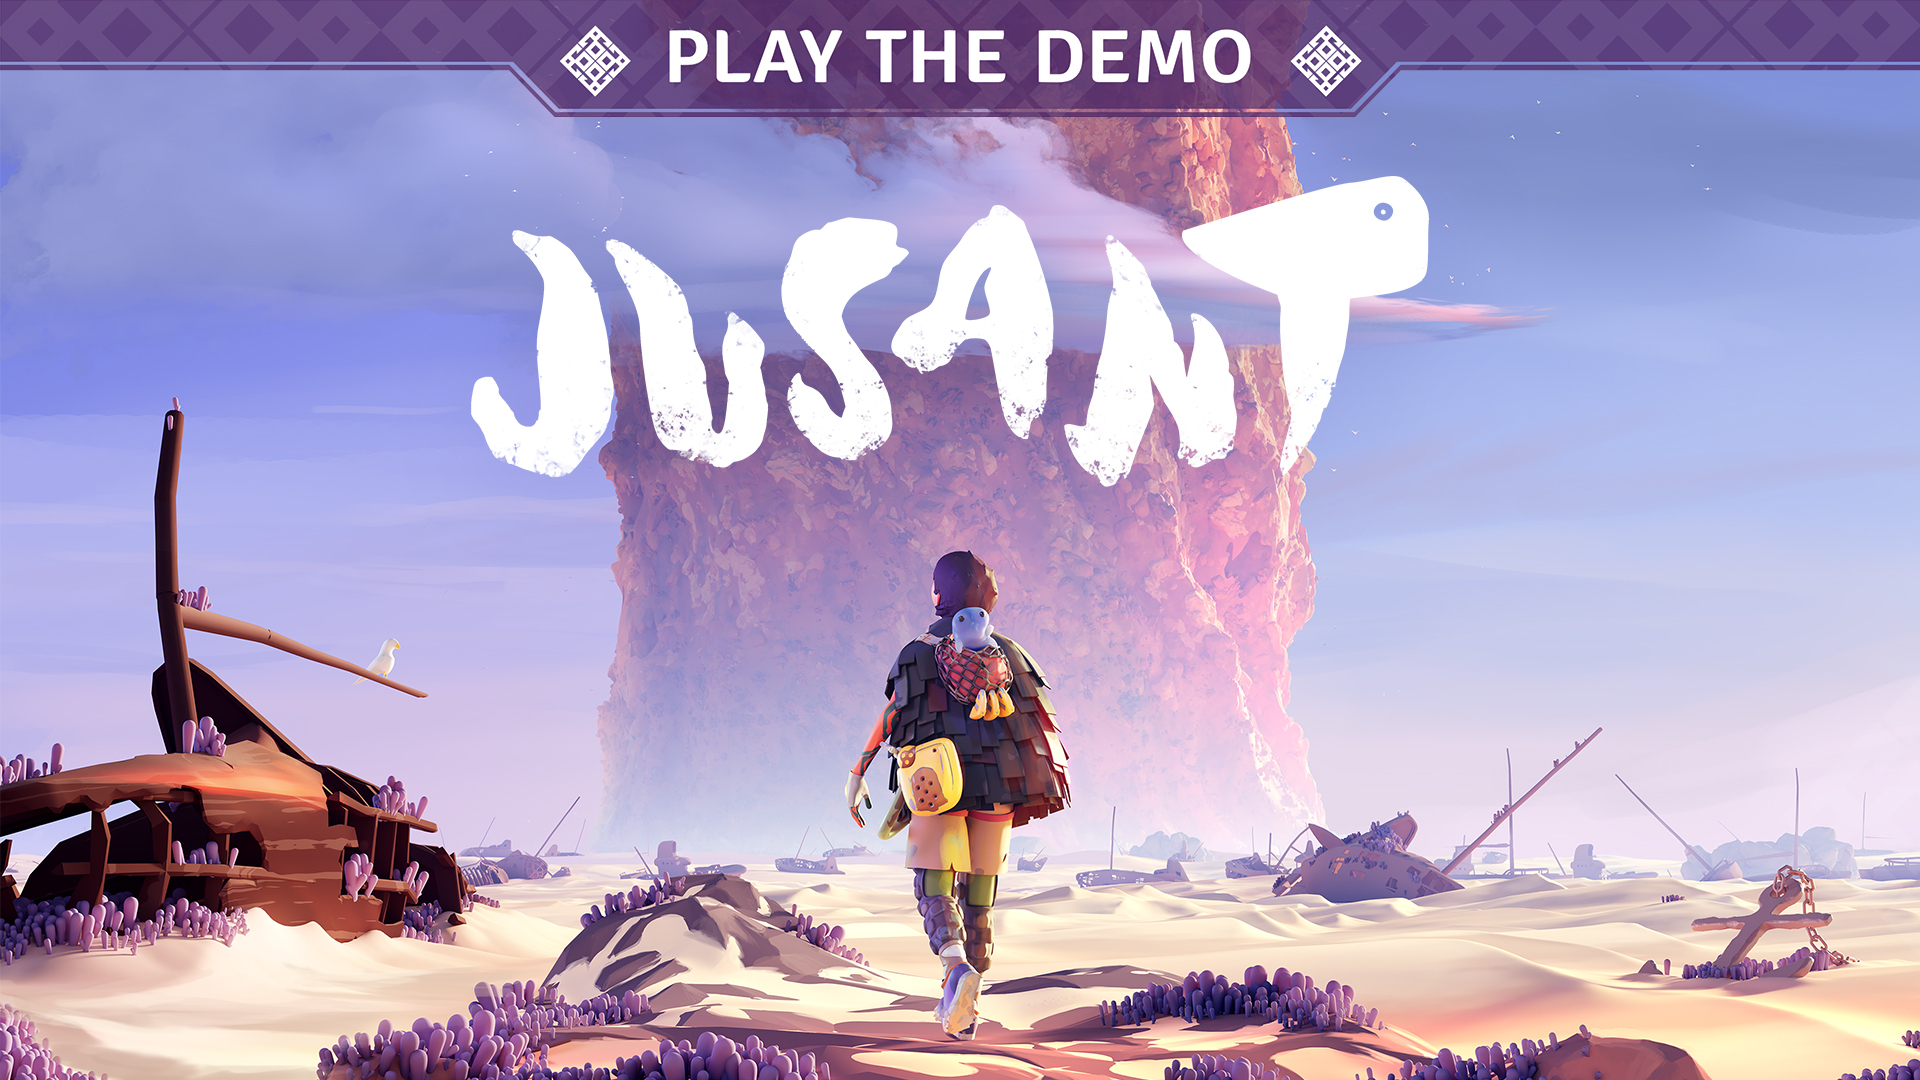 The Jusant demo returns to Steam!